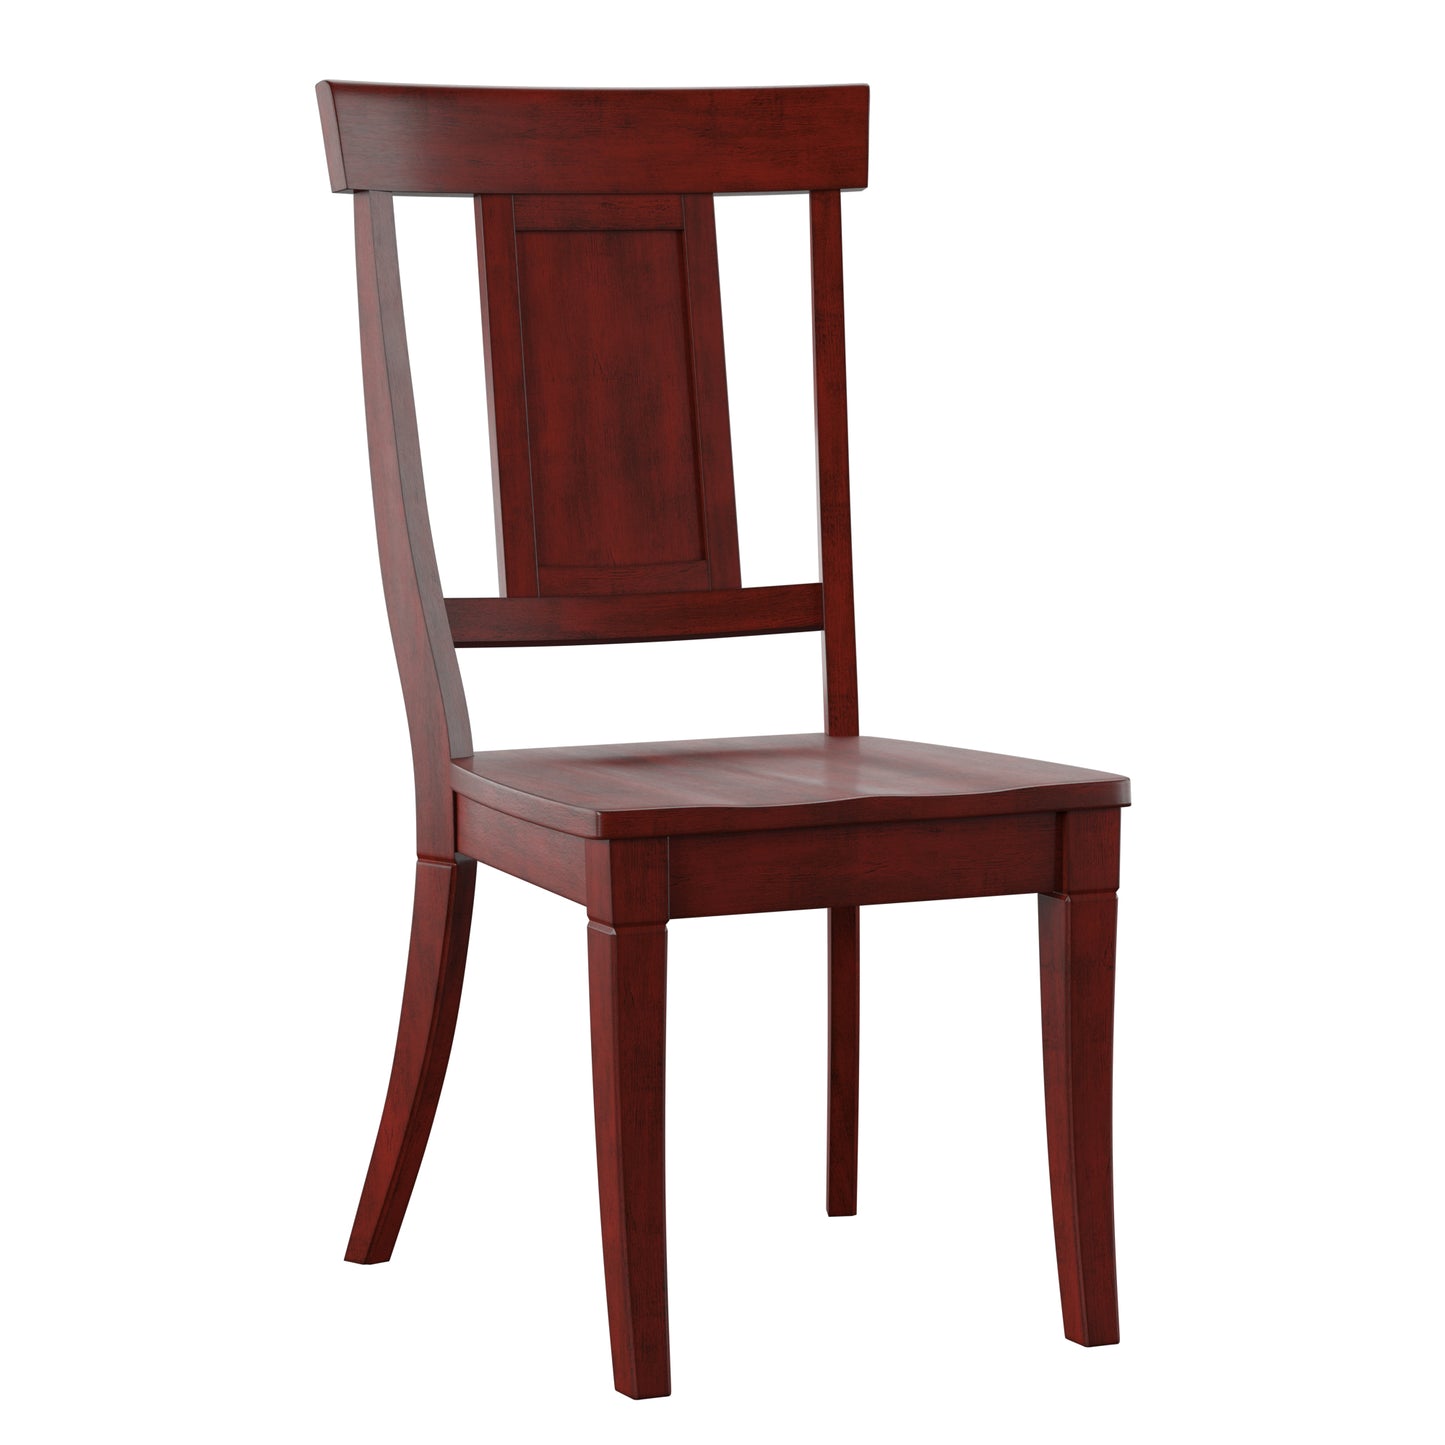 Panel Back Wood Dining Chairs (Set of 2) - Antique Berry Red Finish